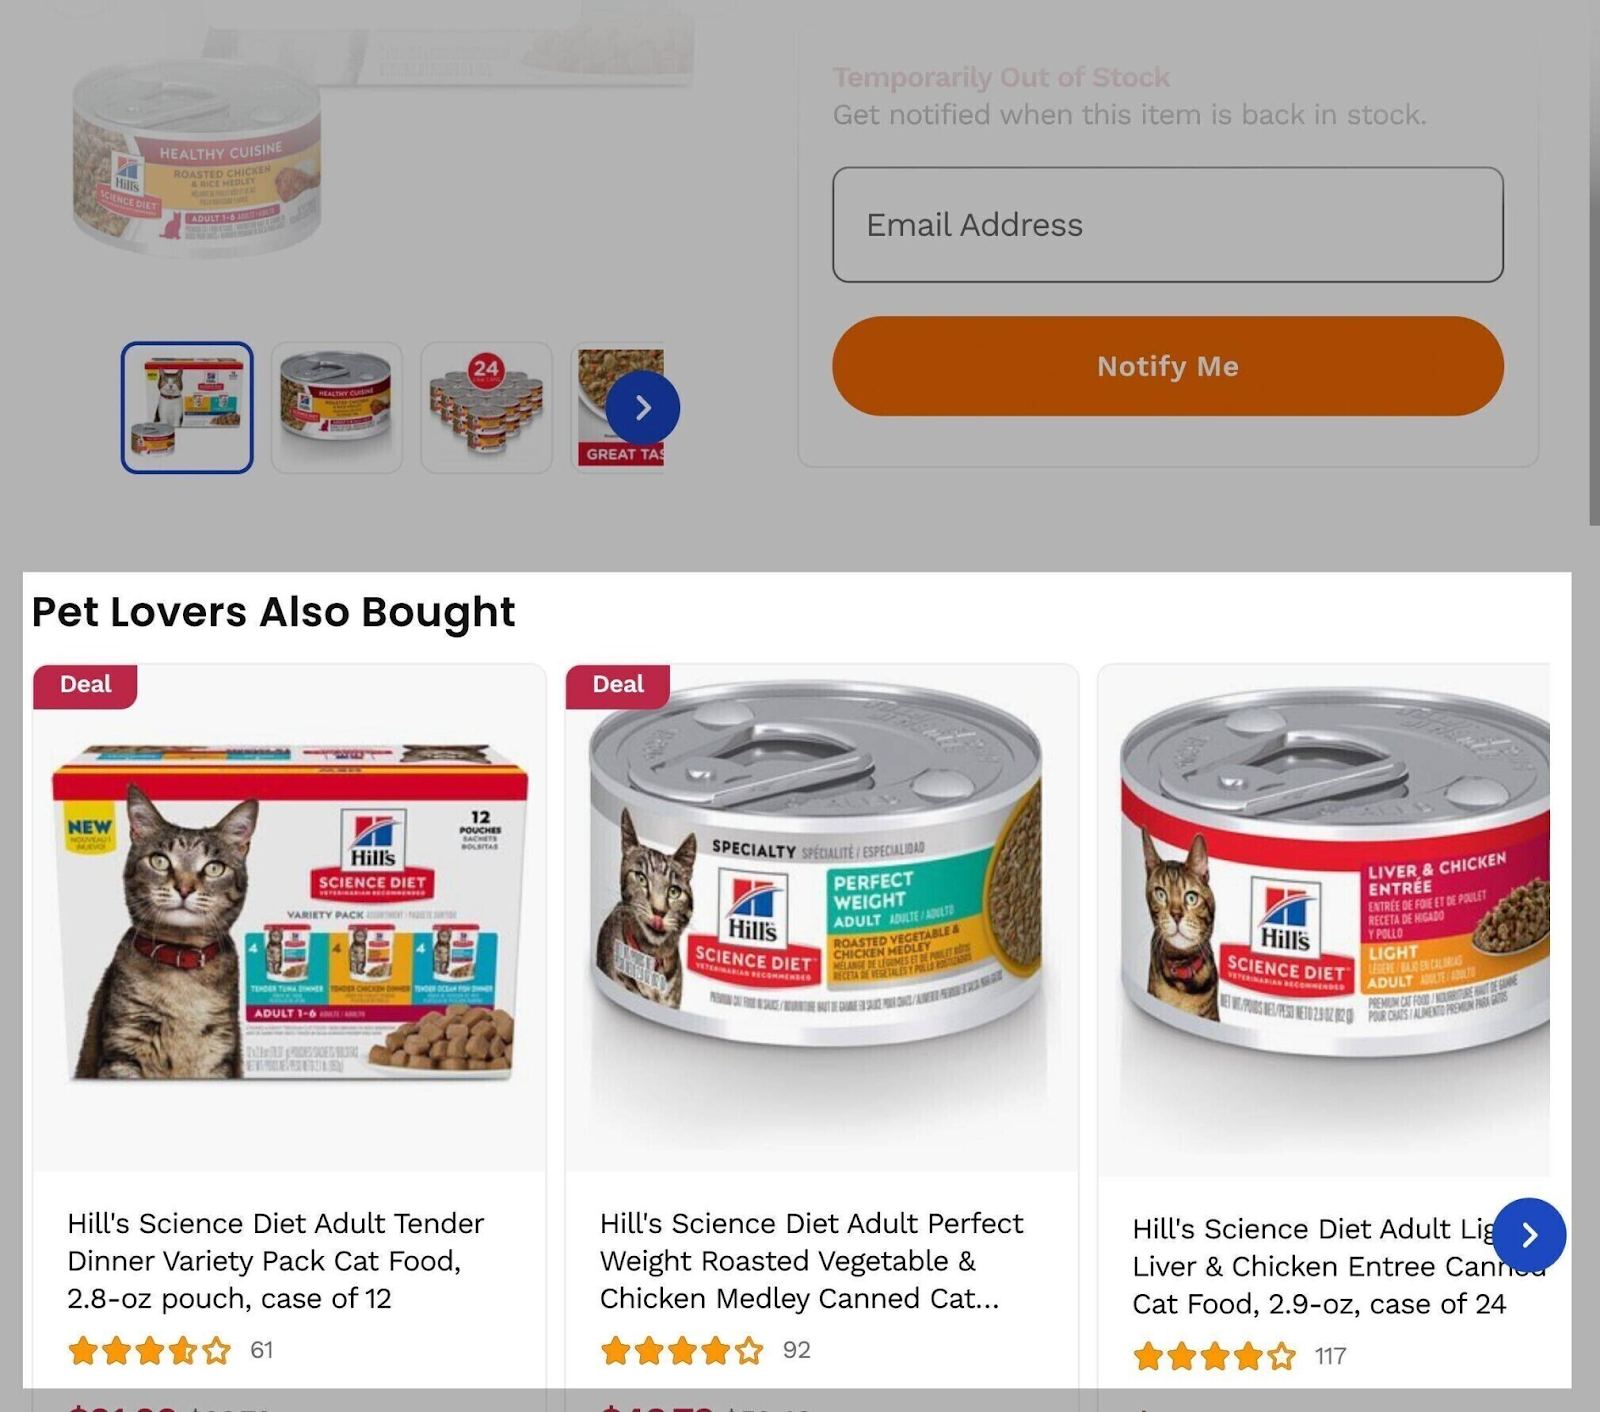 "Pet Lovers Also Bought" section of the site